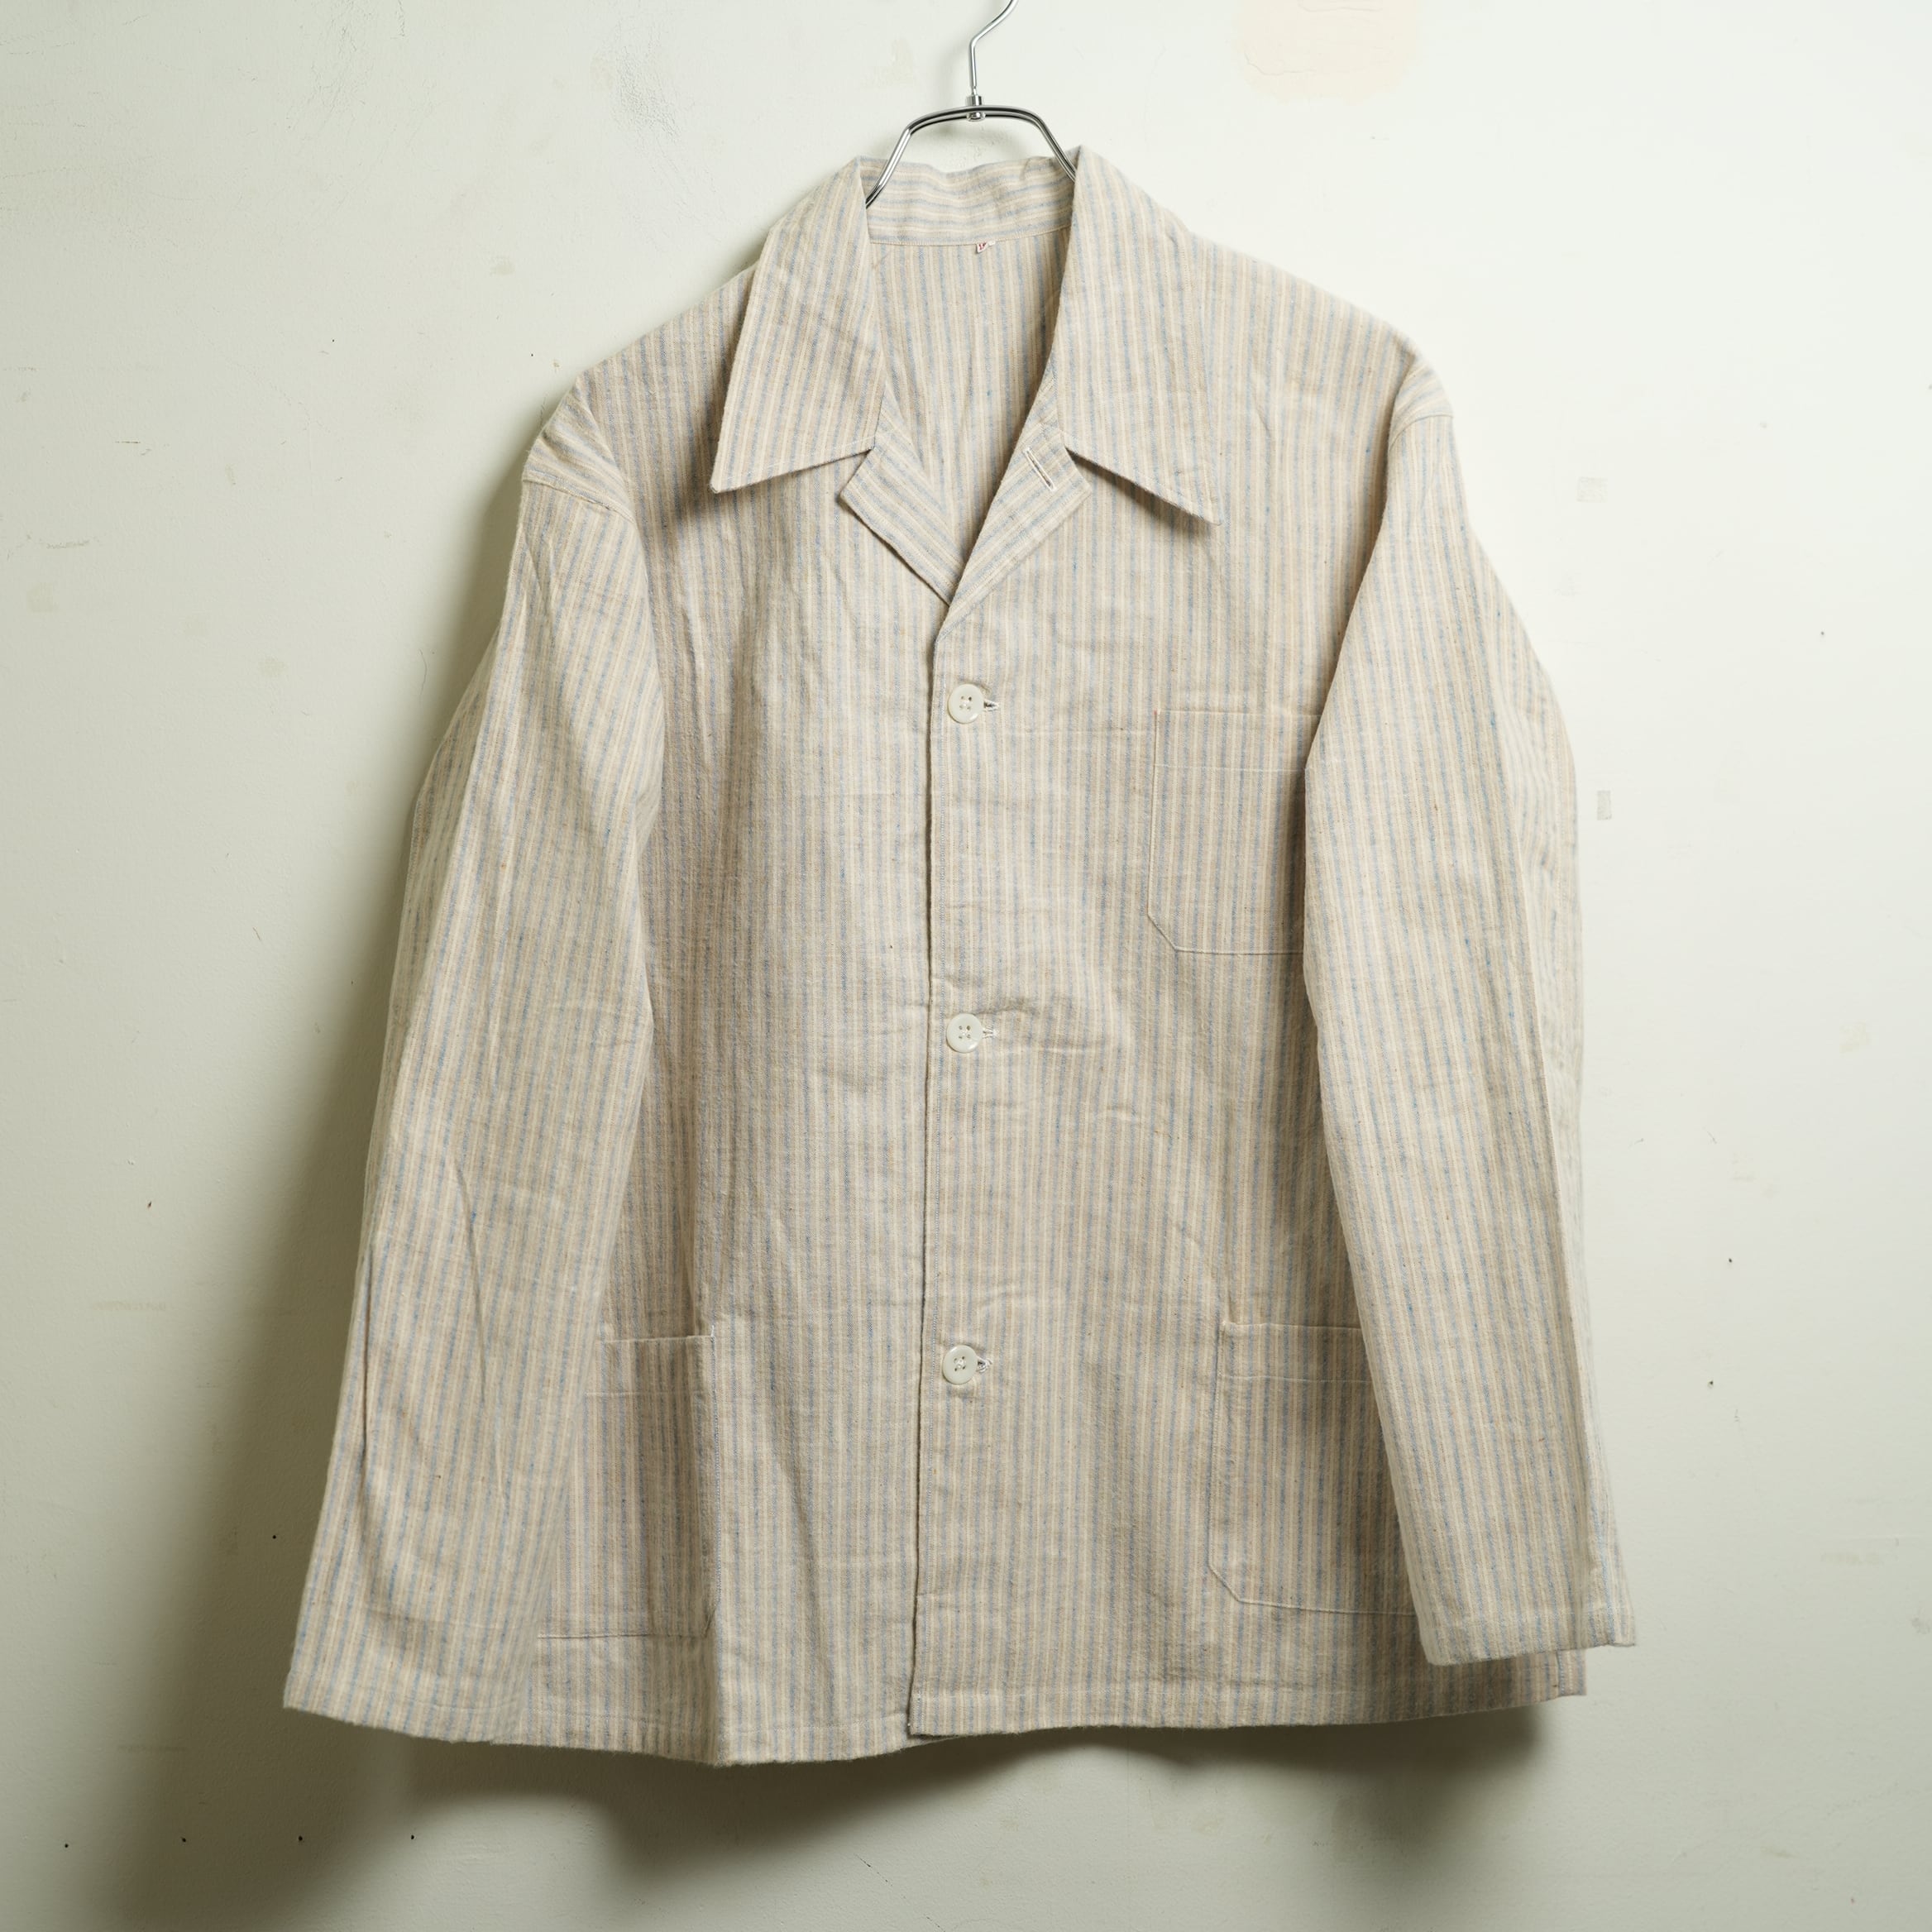 50's French Military Hospital Pajamas Shirt 【DEADSTOCK】 | AMICI used  vintage clothing store